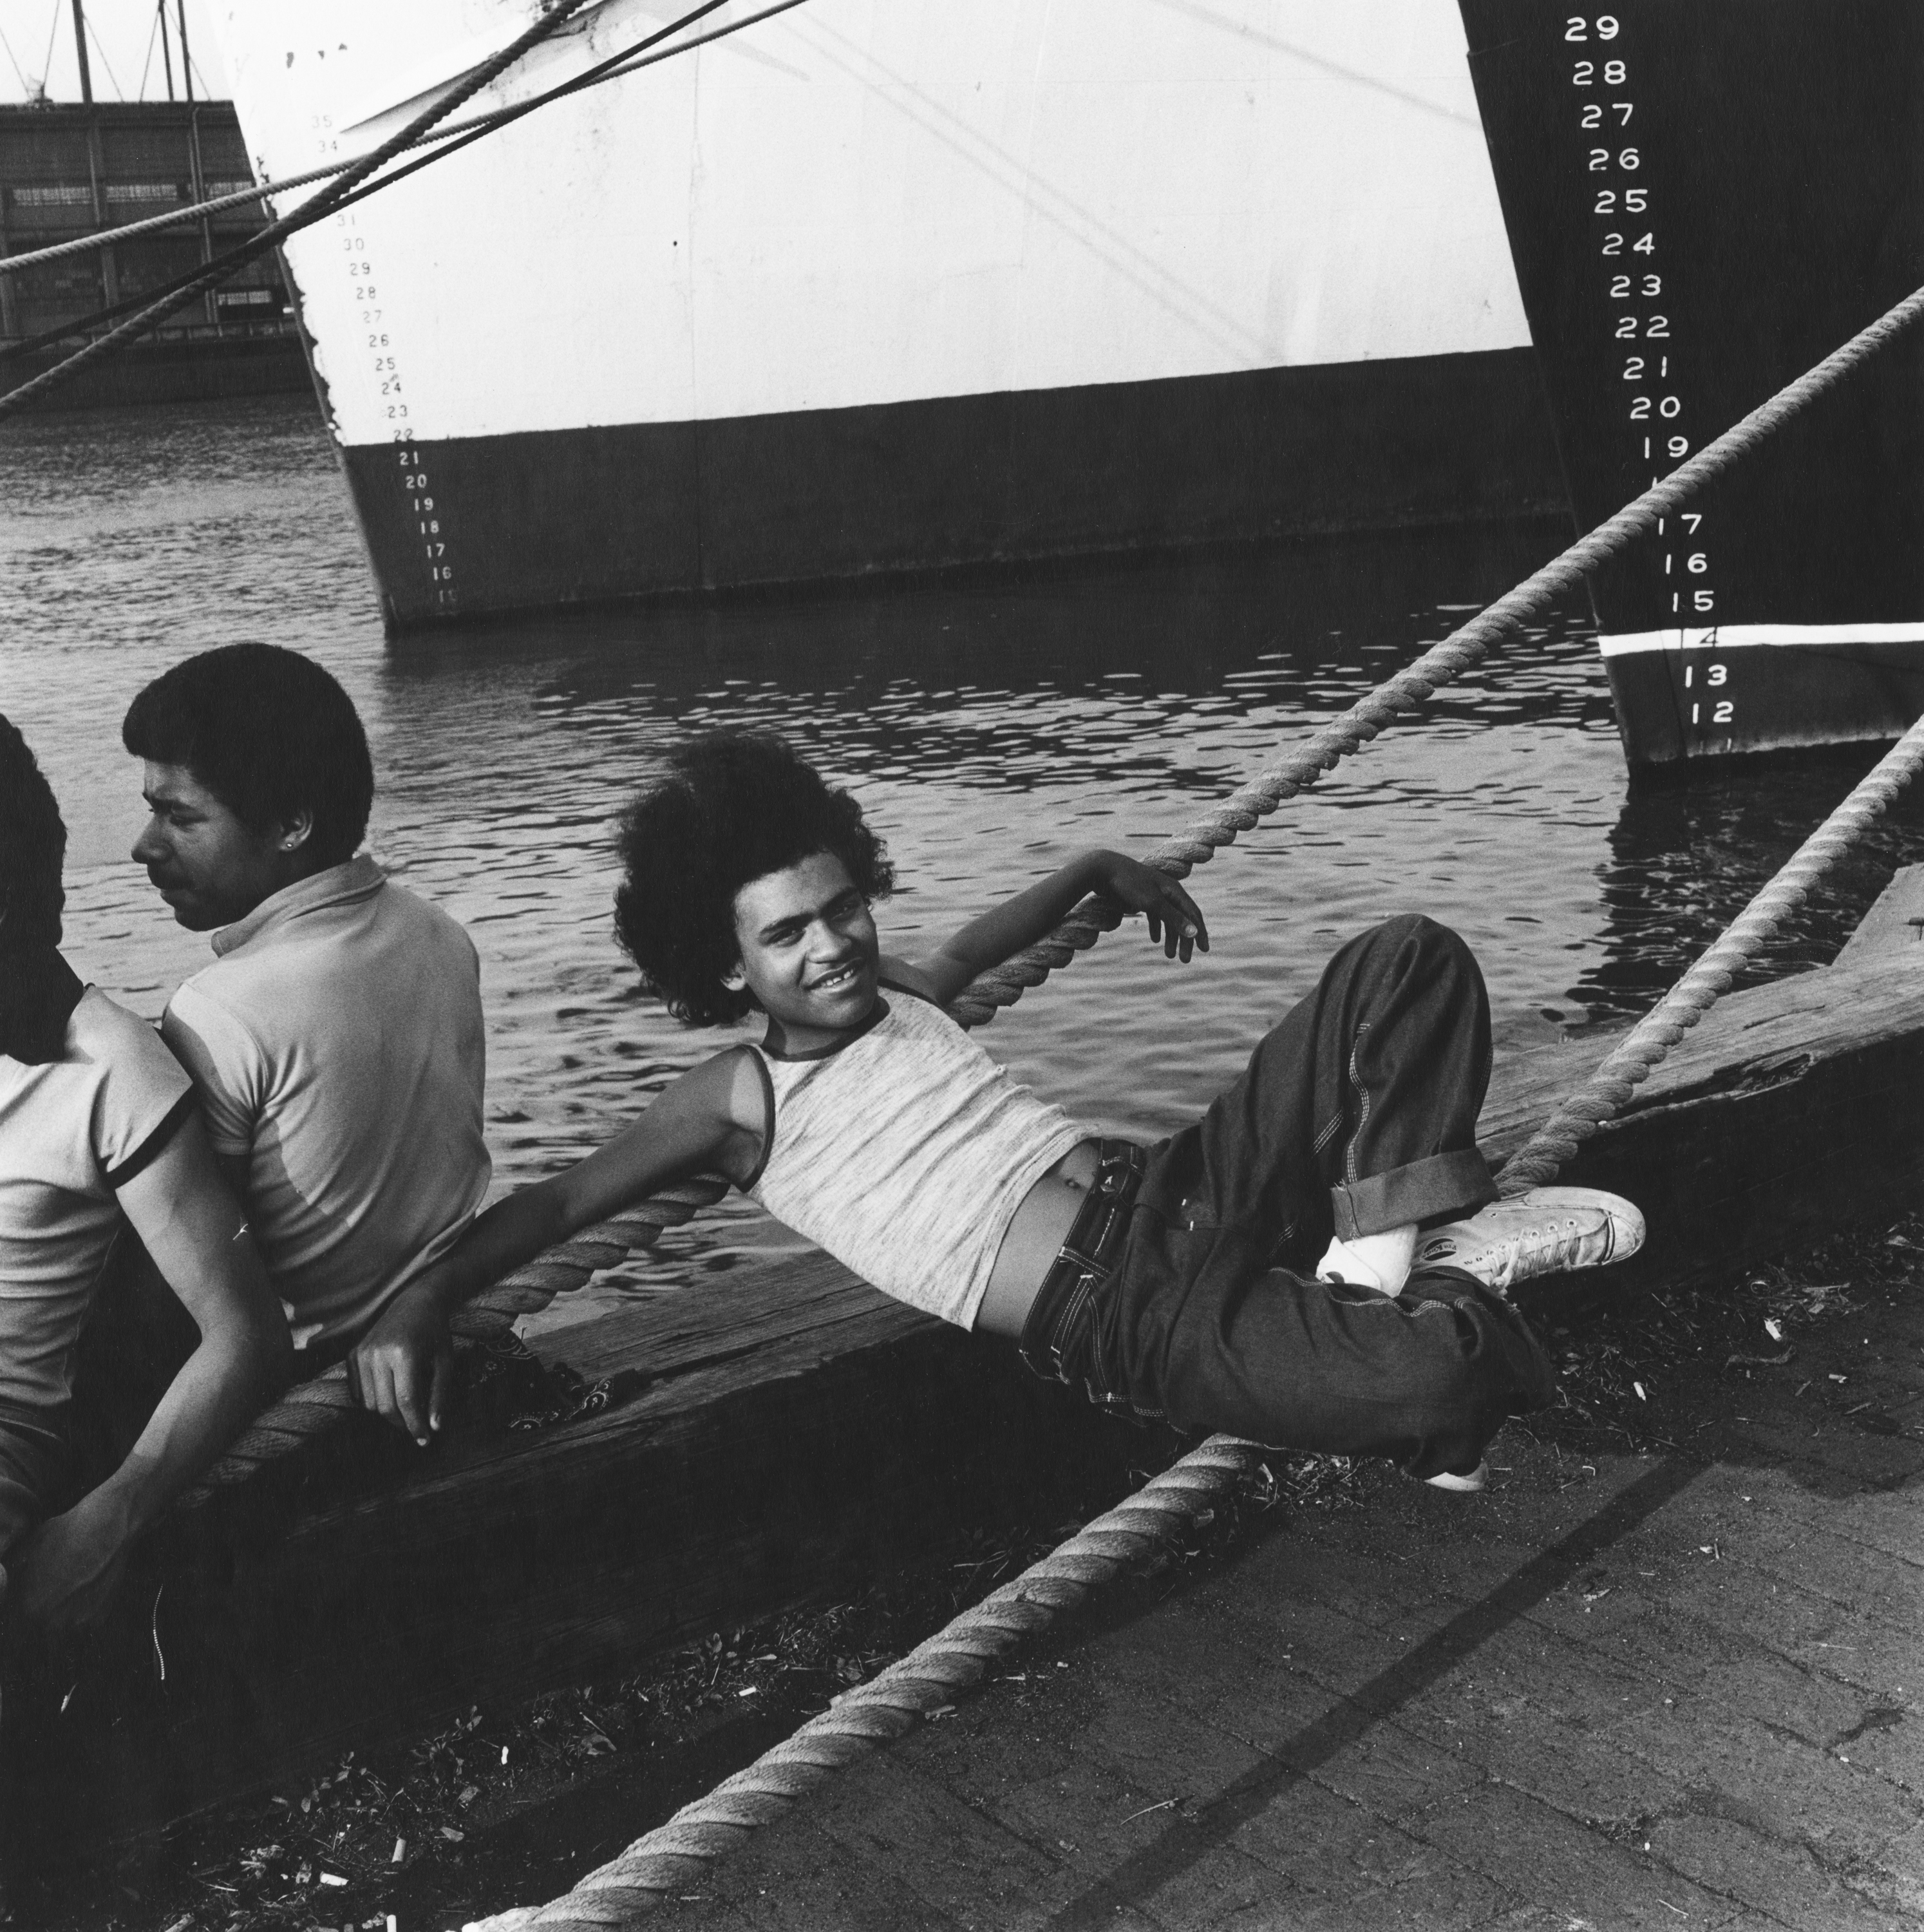 Black and white photograph of a figure laying on ropes attached to a pier while looking directly at the viewer